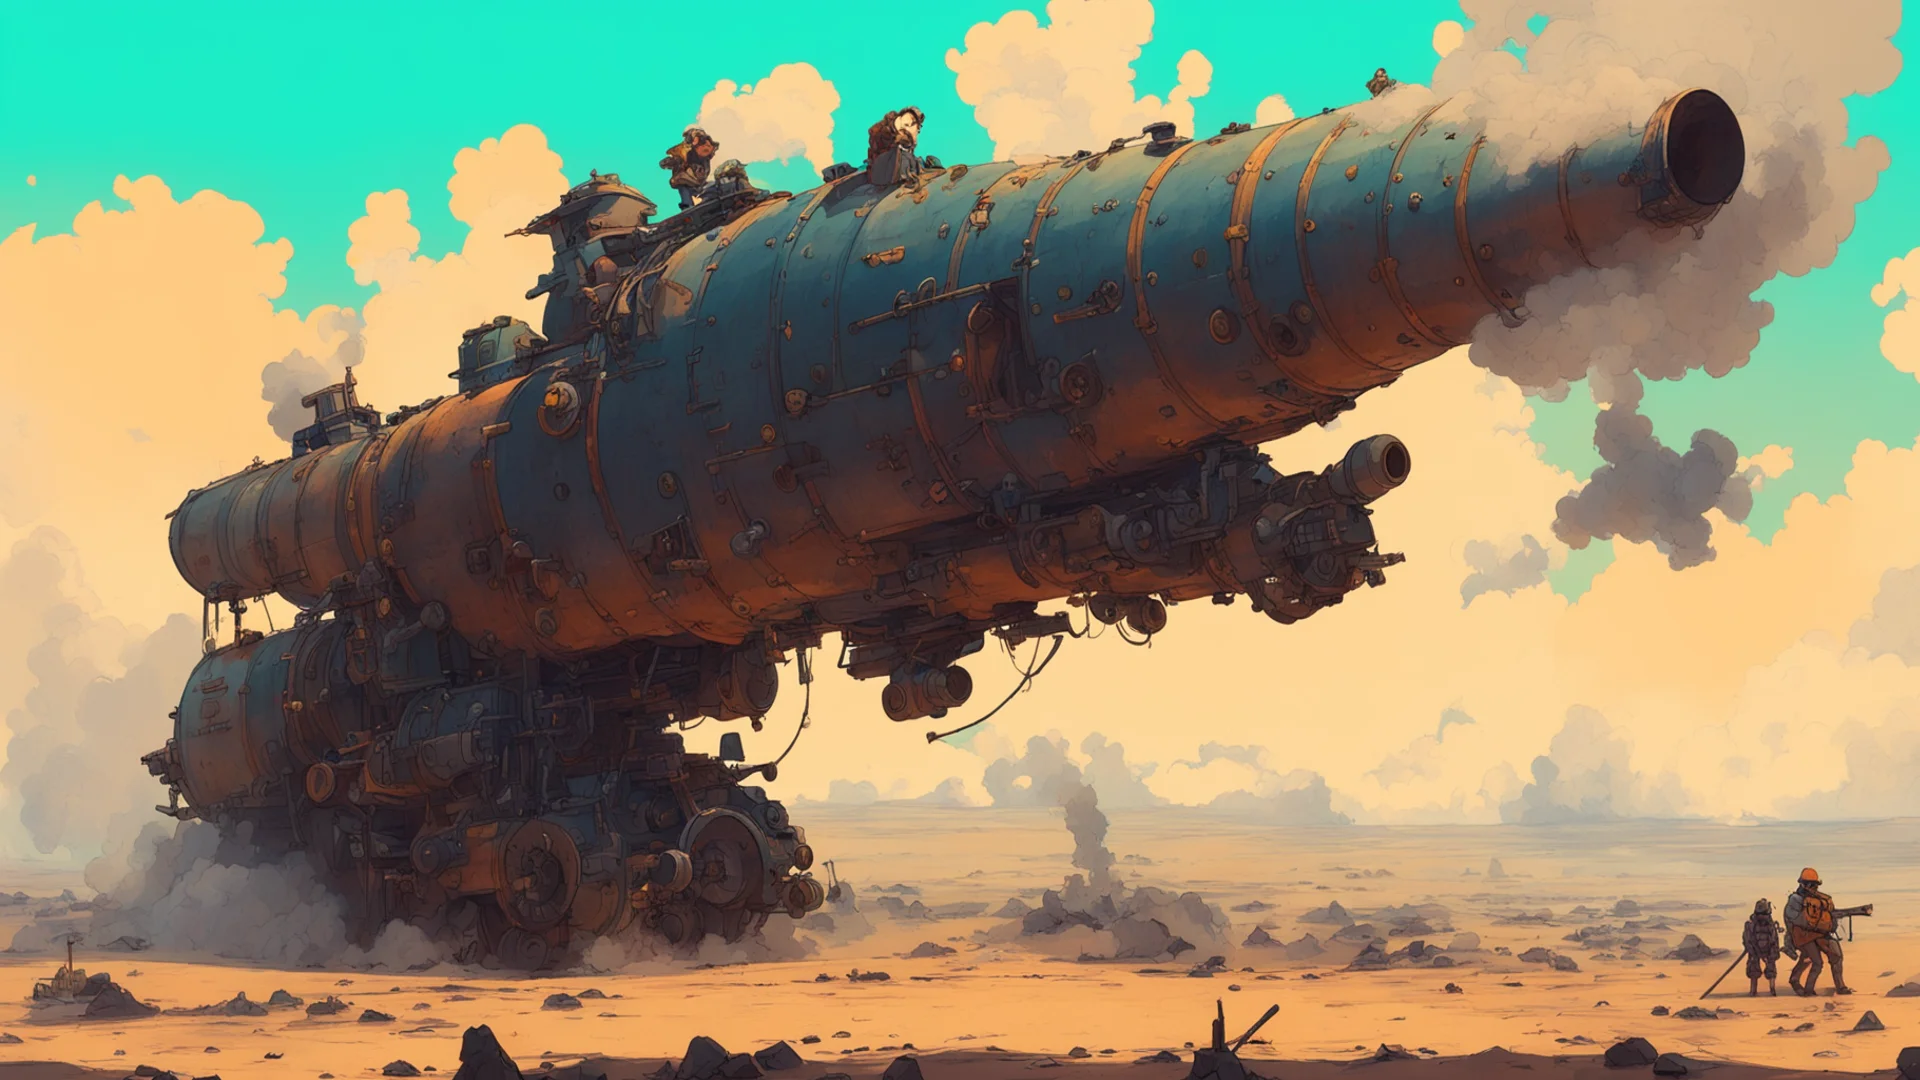 aiamazing a smoking cannon designed by george lucas on a battlefield moebius ghibli ian mcque wallpaper awesome portrait 2 wide